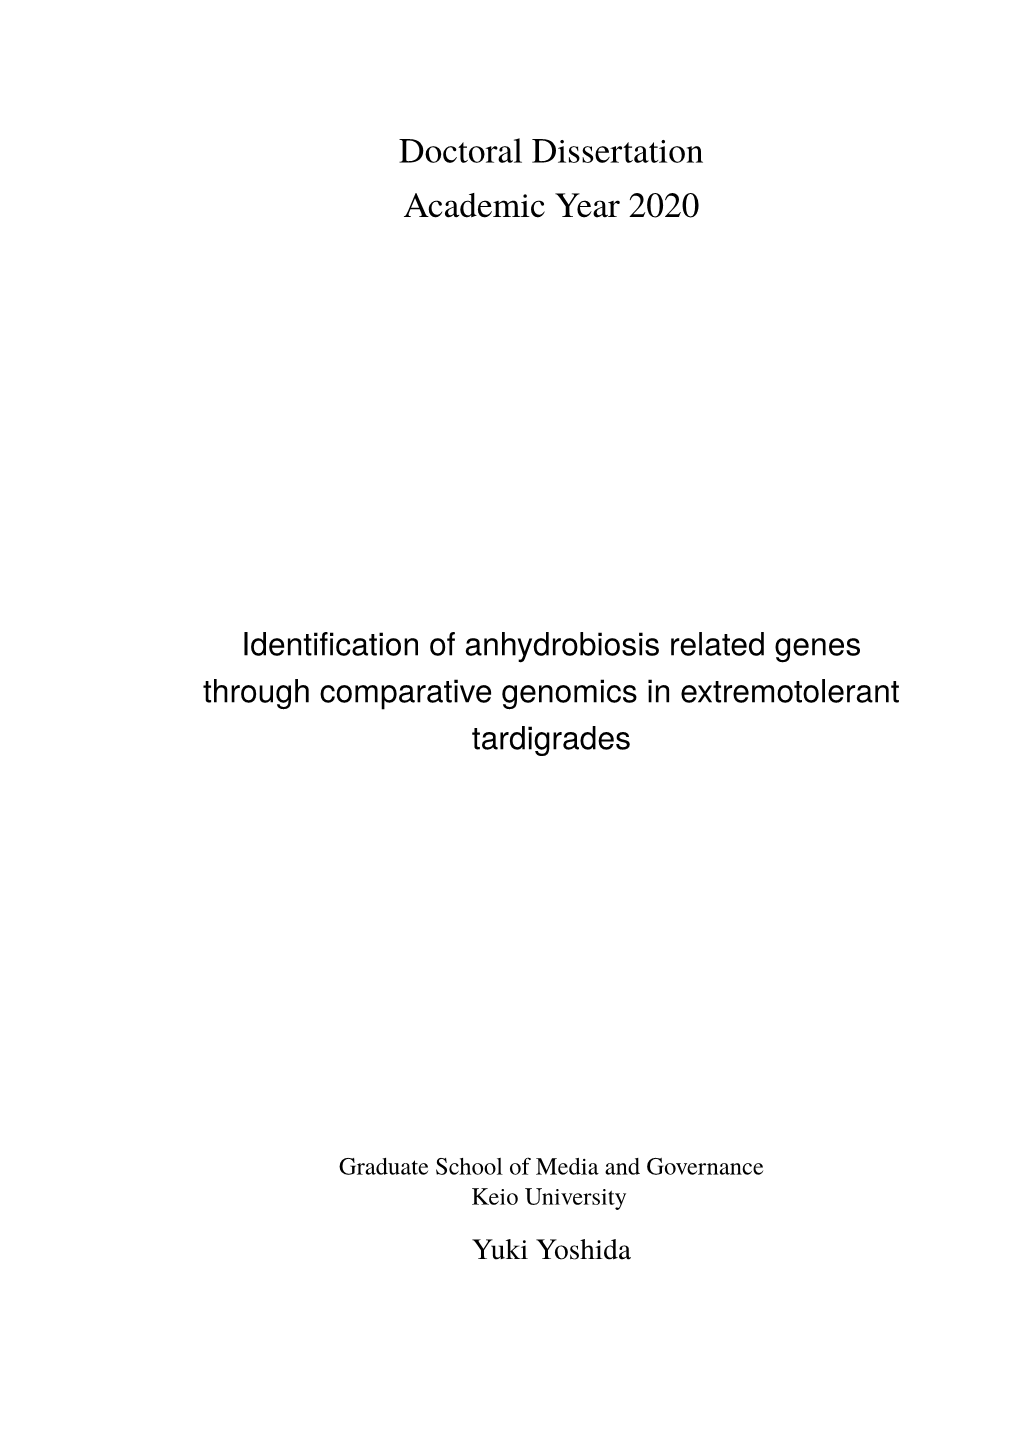 Identification of Anhydrobiosis Related Genes Through Comparative